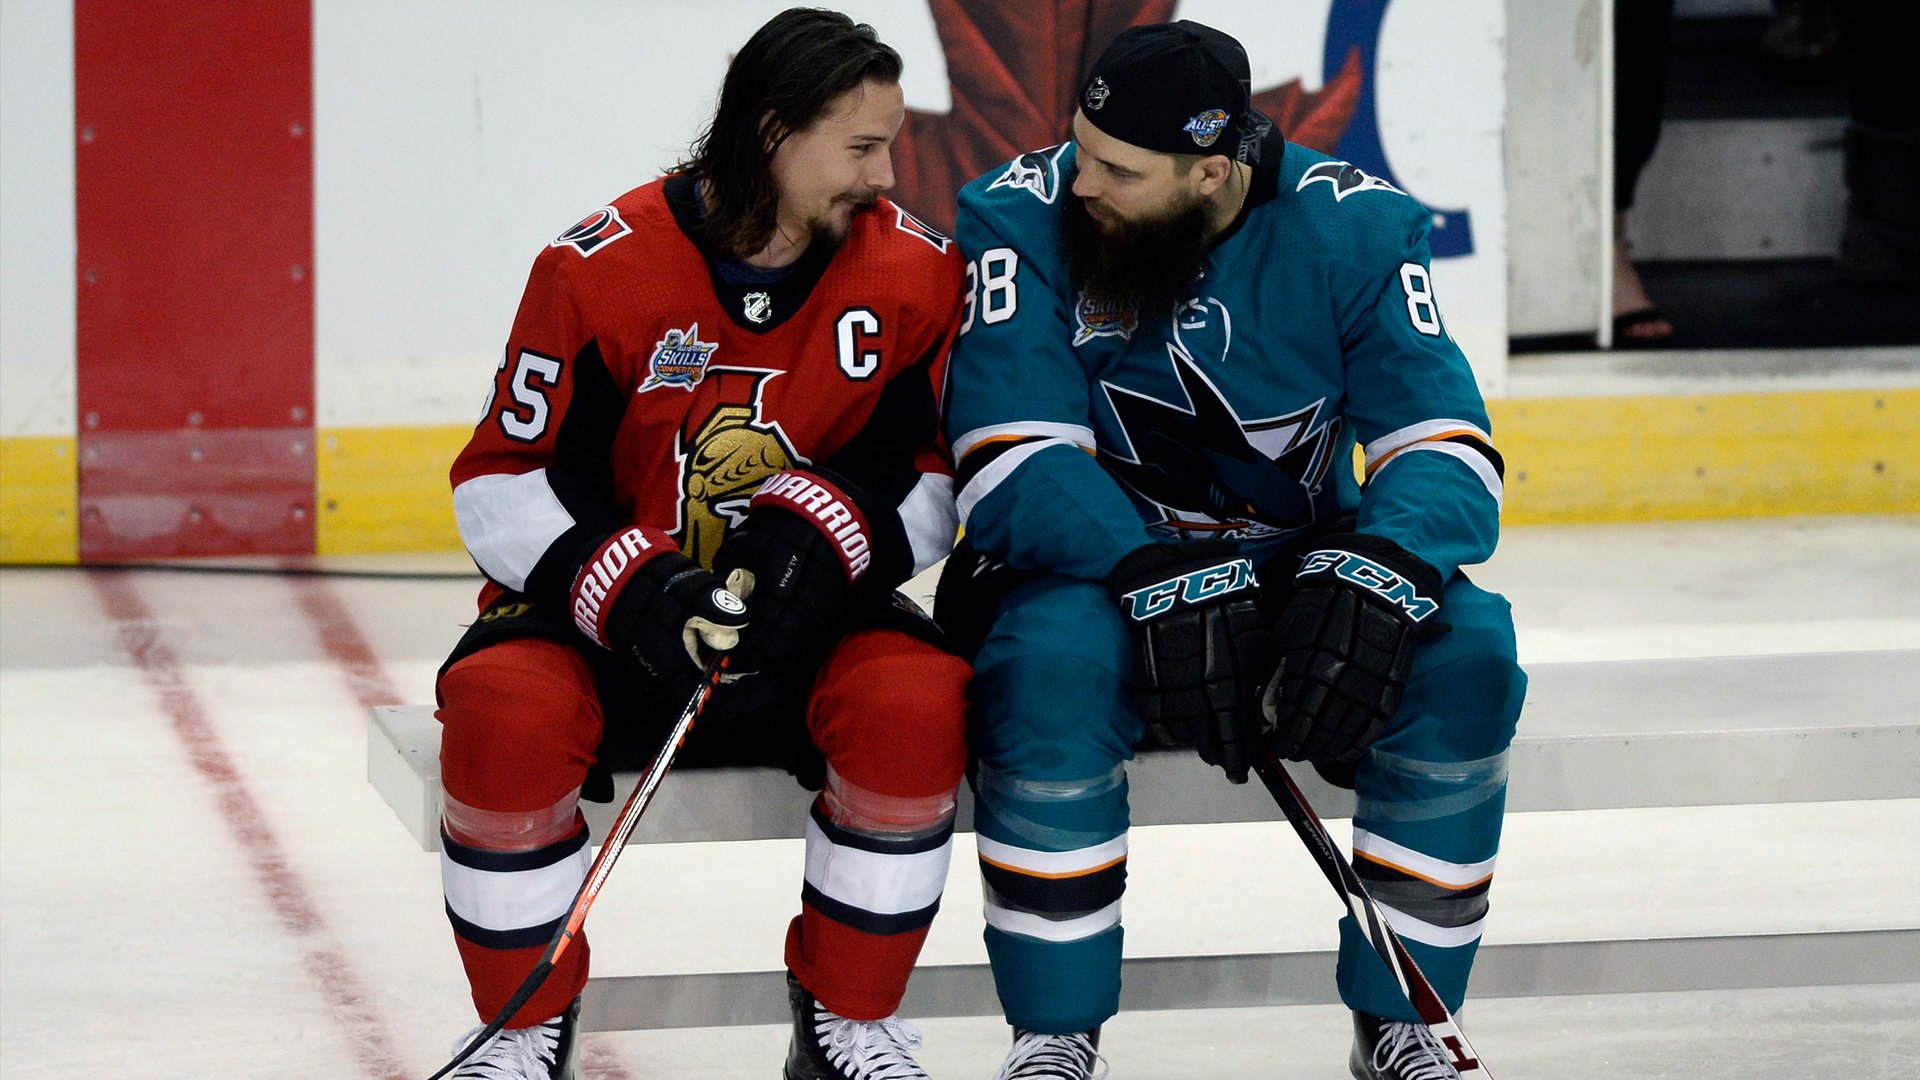 Erik Karlsson trade shows Doug Wilson is all in for Sharks to win